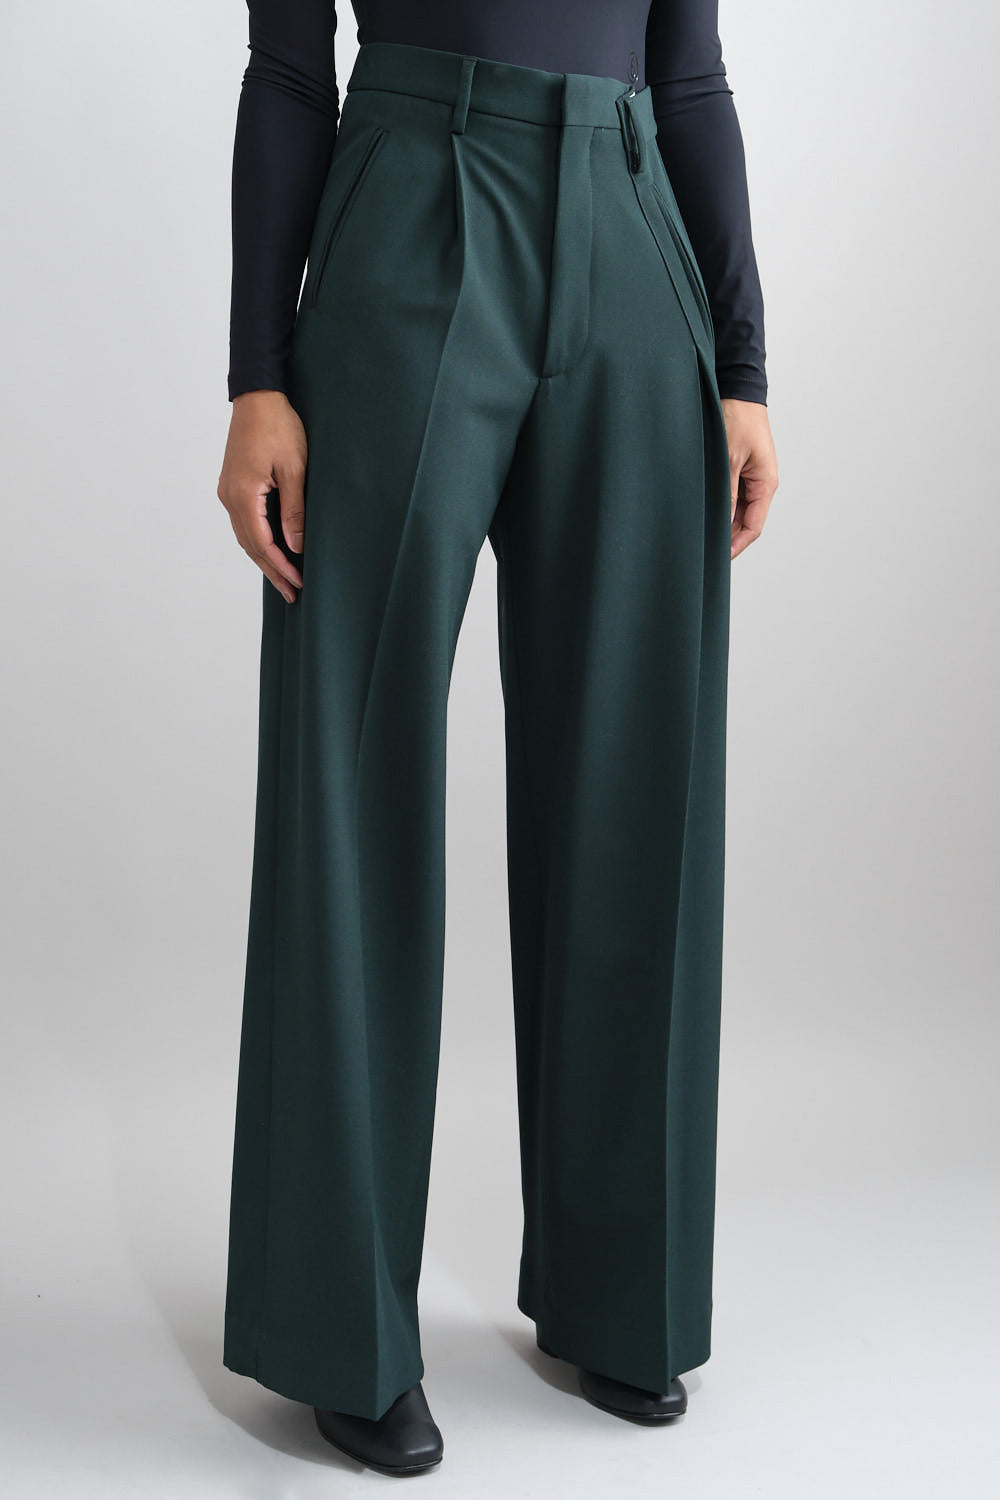 Front of Wide-Leg Trouser in Green